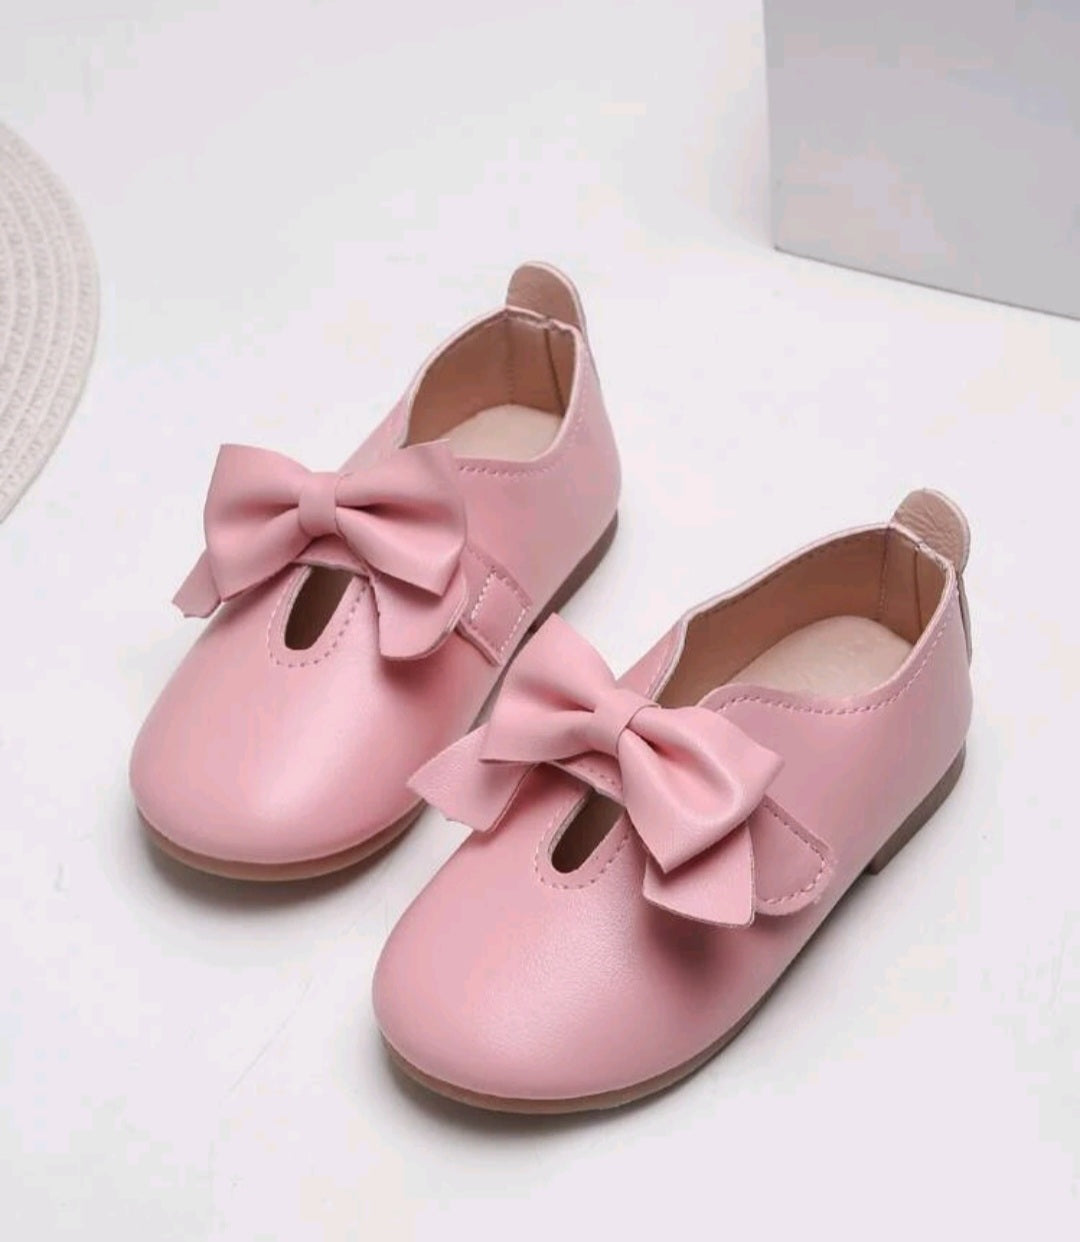 Girls Hook-and-Loop Leather Pink Flats with Bow